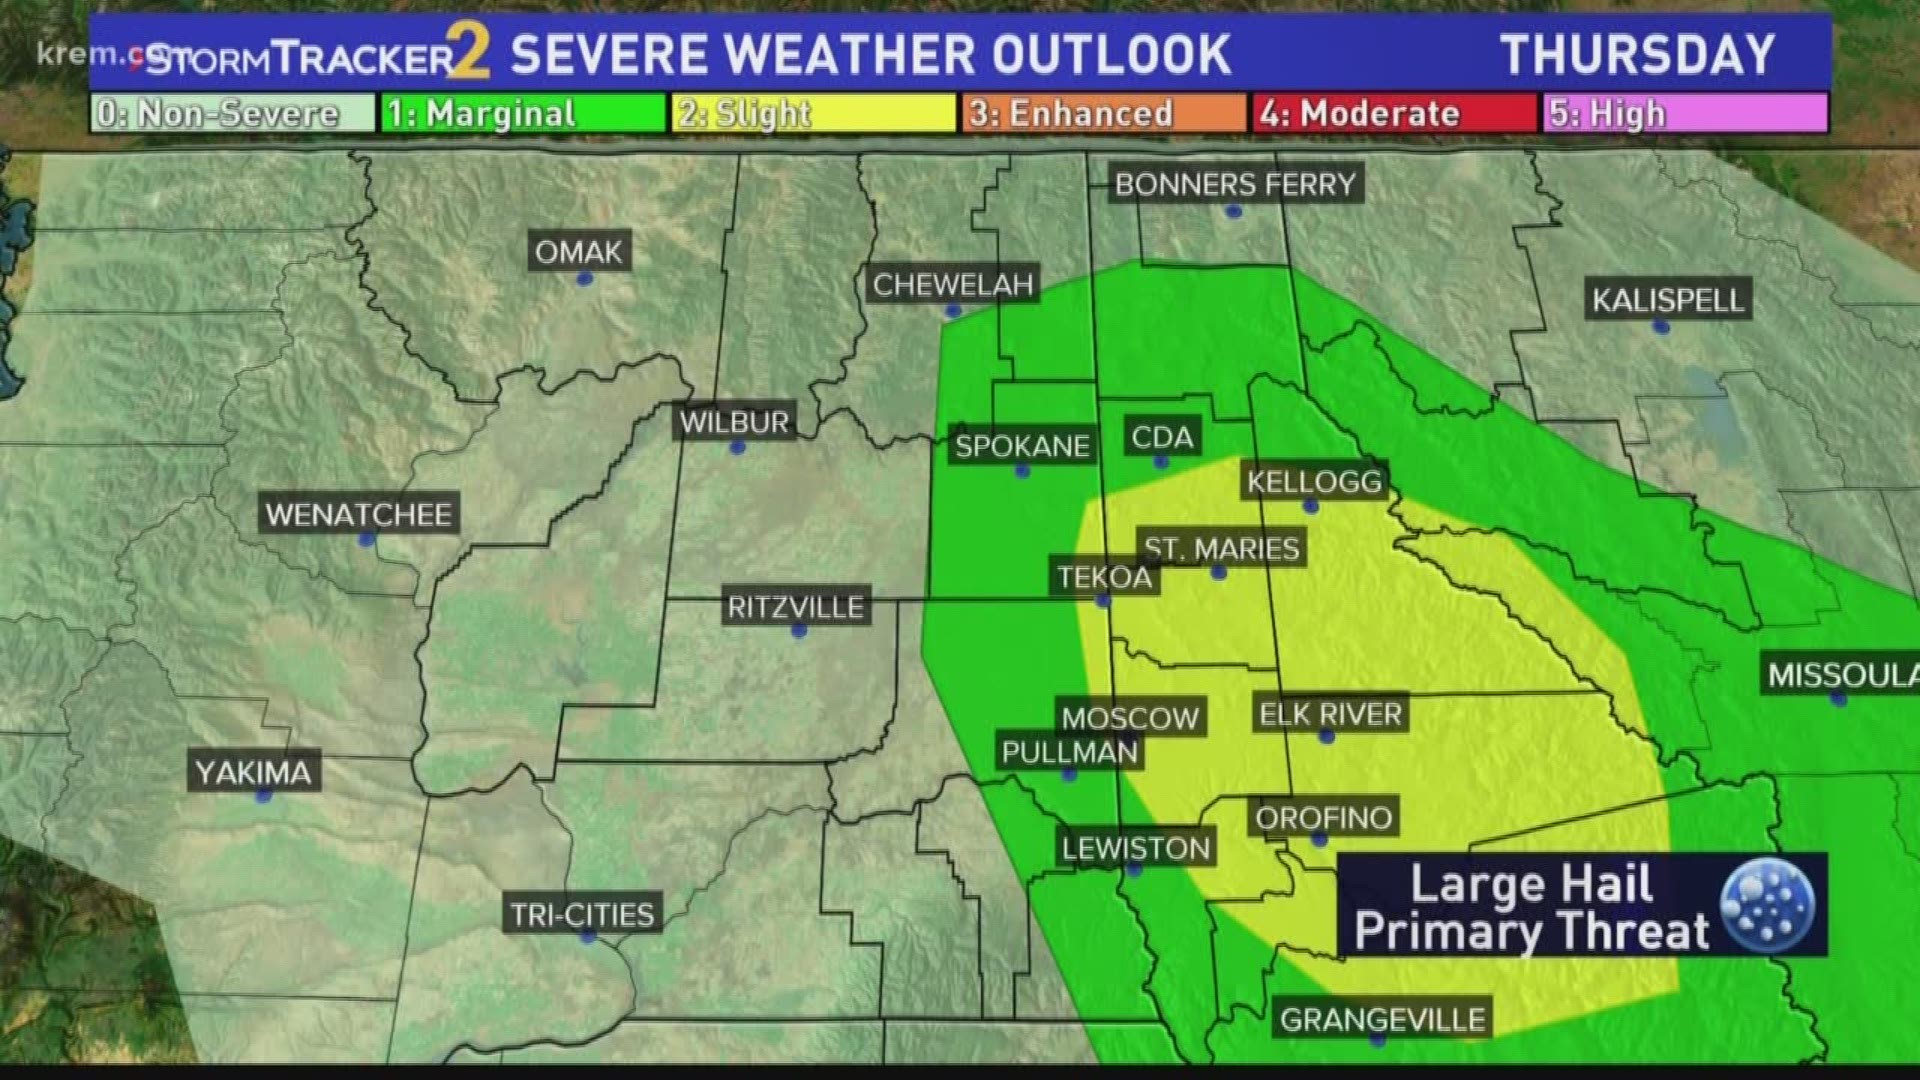 The Inland Northwest saw it's first batch of severe storms for the year on Thursday. For our area - this is normal to see strong storms in the Spring and Summer